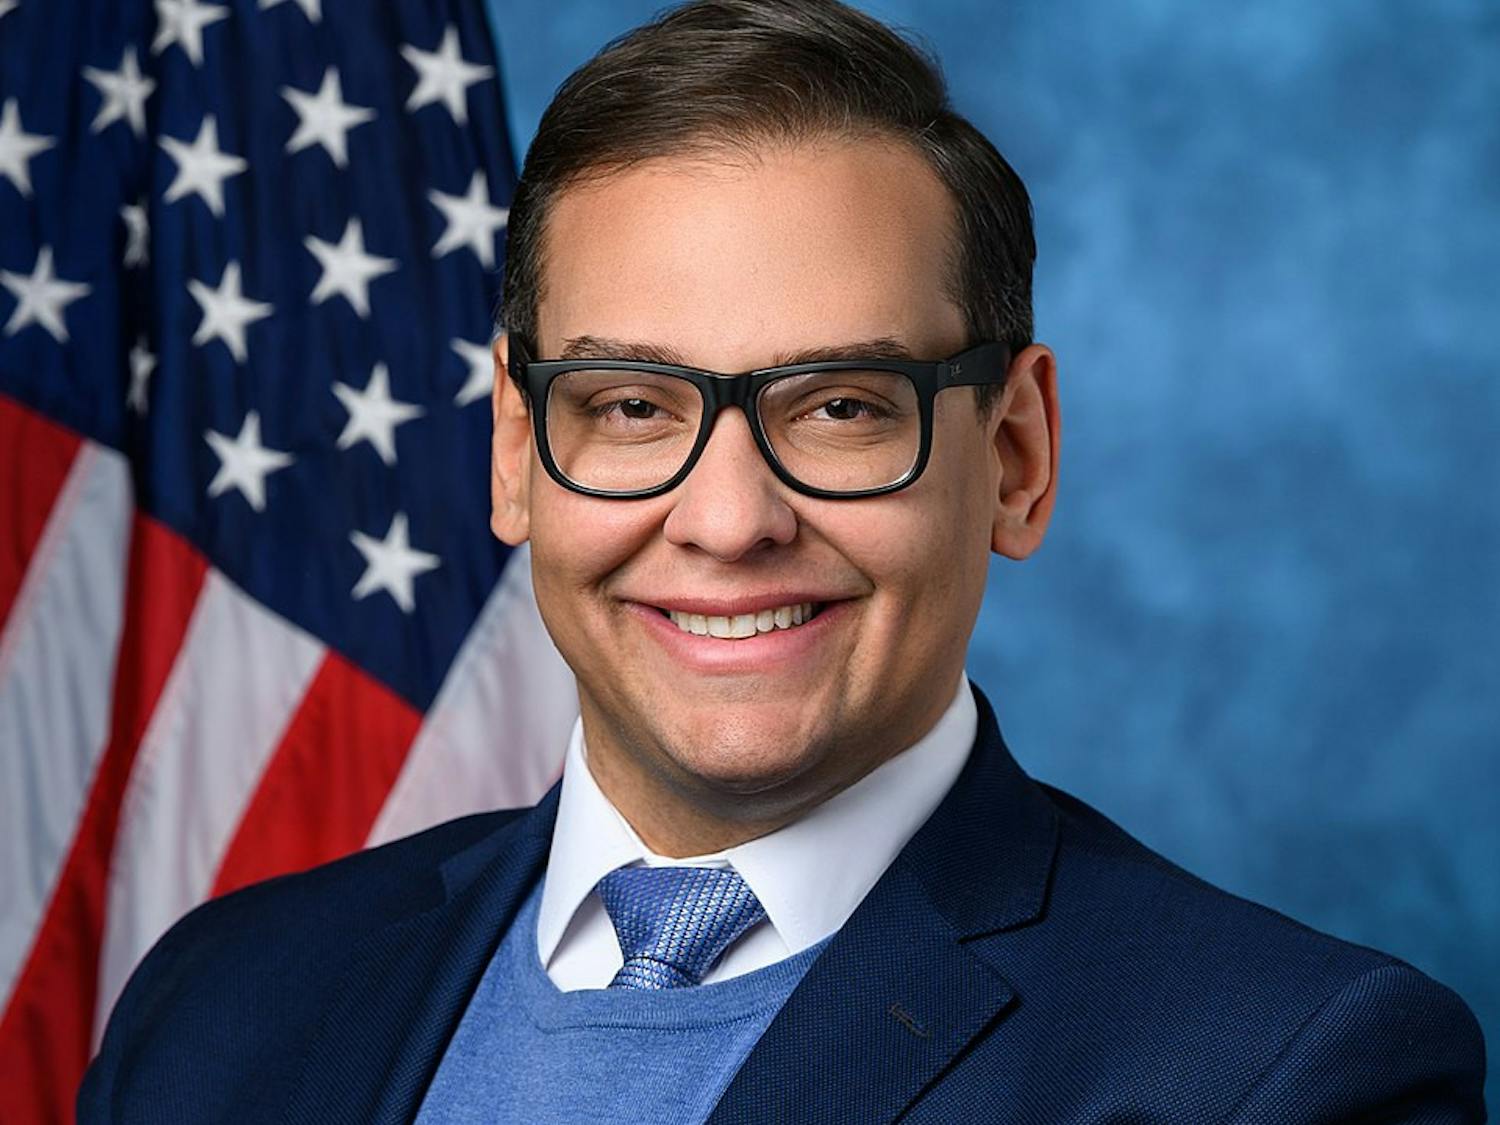 Federal prosecutors have accused Rep. George Santos of stealing donor’s identities and fraudulently ringing up tens of thousands of dollars on their credit cards in unauthorized charges (Photo courtesy of Wikimedia Commons/“Rep. George Santos Official Portrait” by U.S. House Office of Photography. December 2, 2022). 